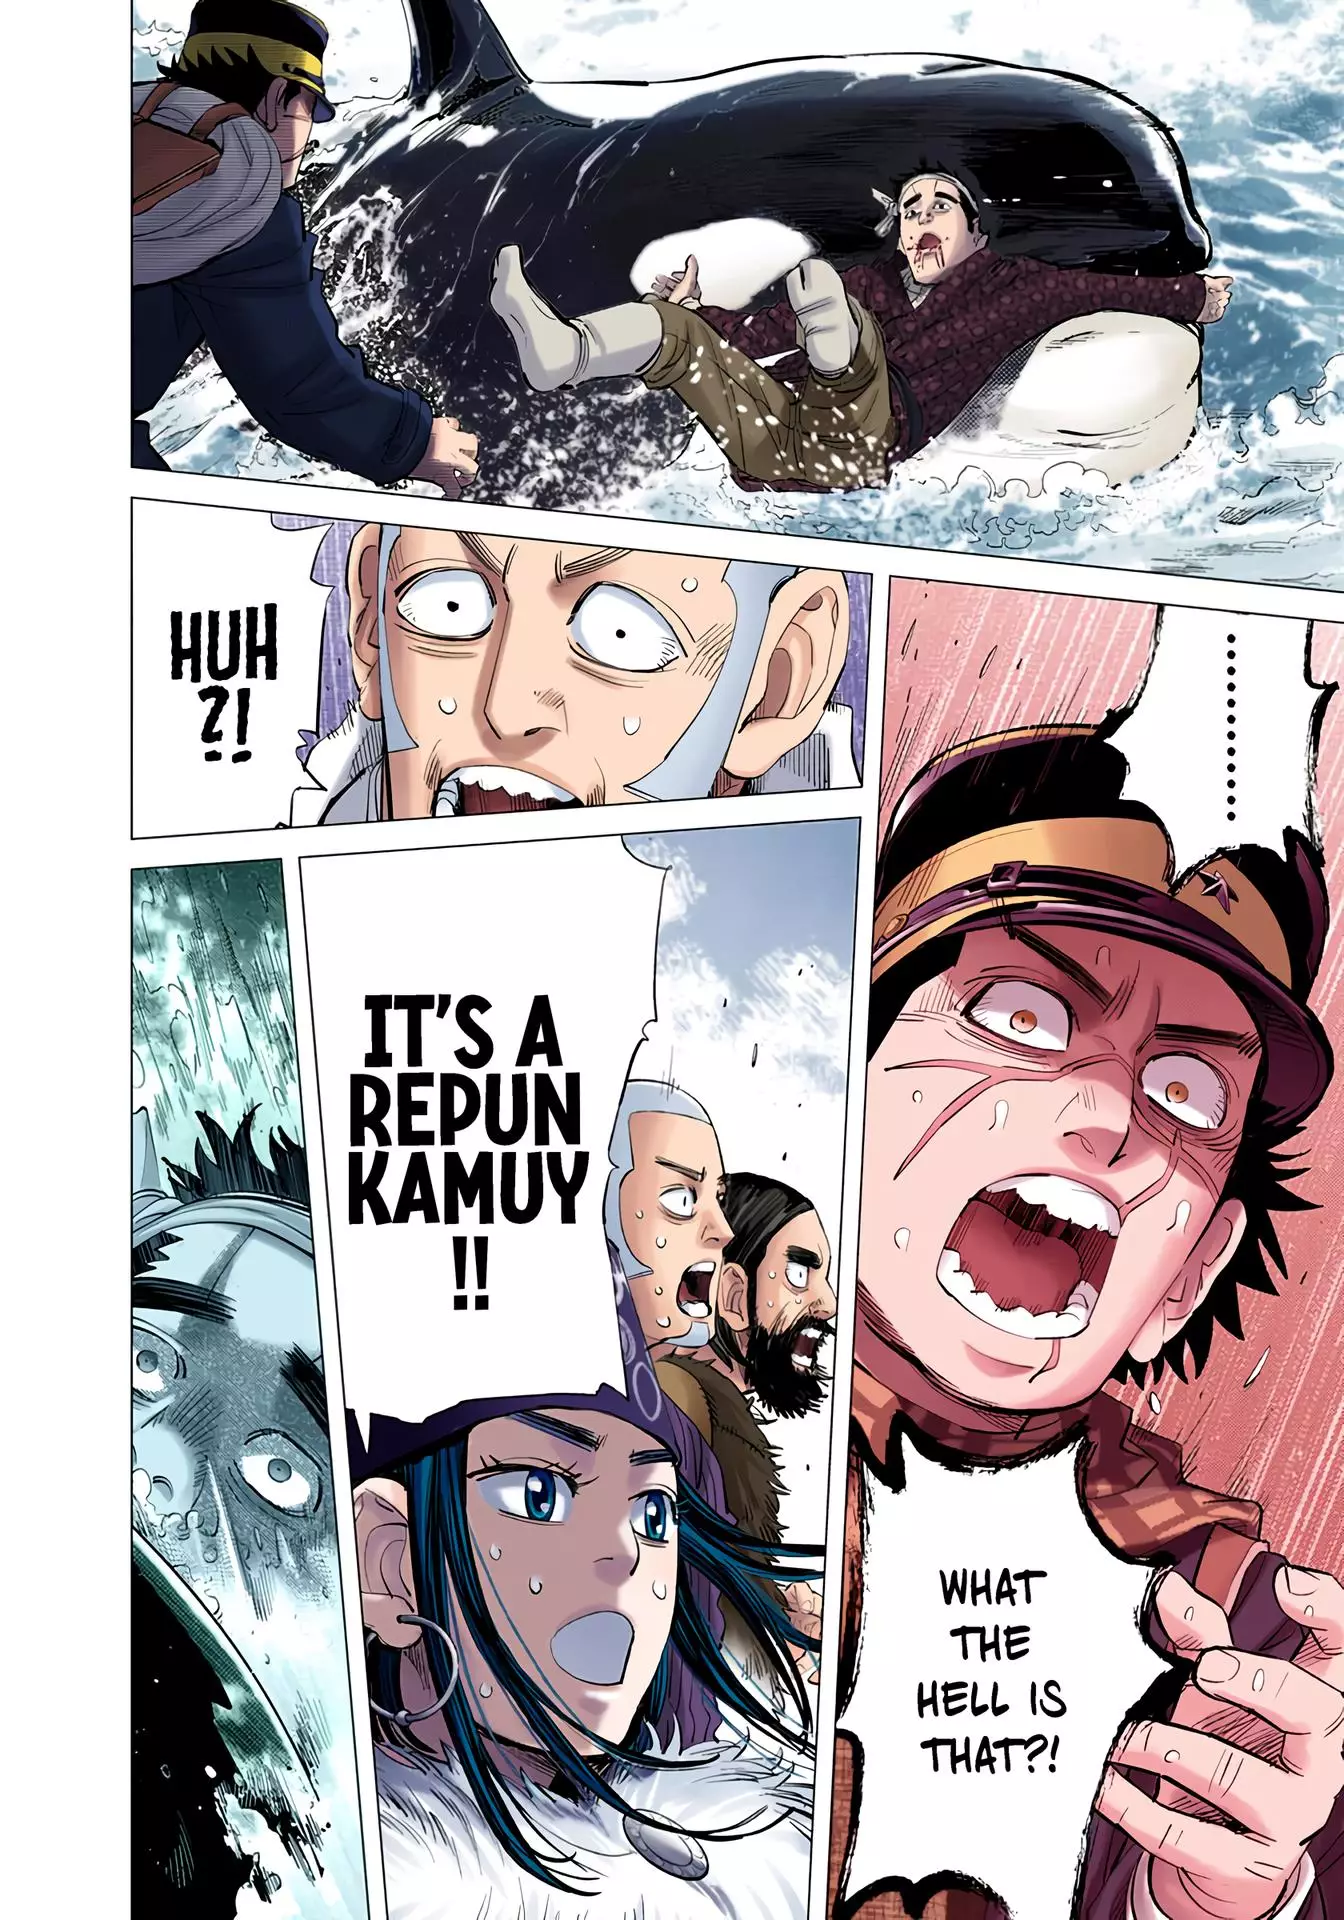 Golden Kamuy - Digital Colored Comics - 41 page 8-9a7056ac